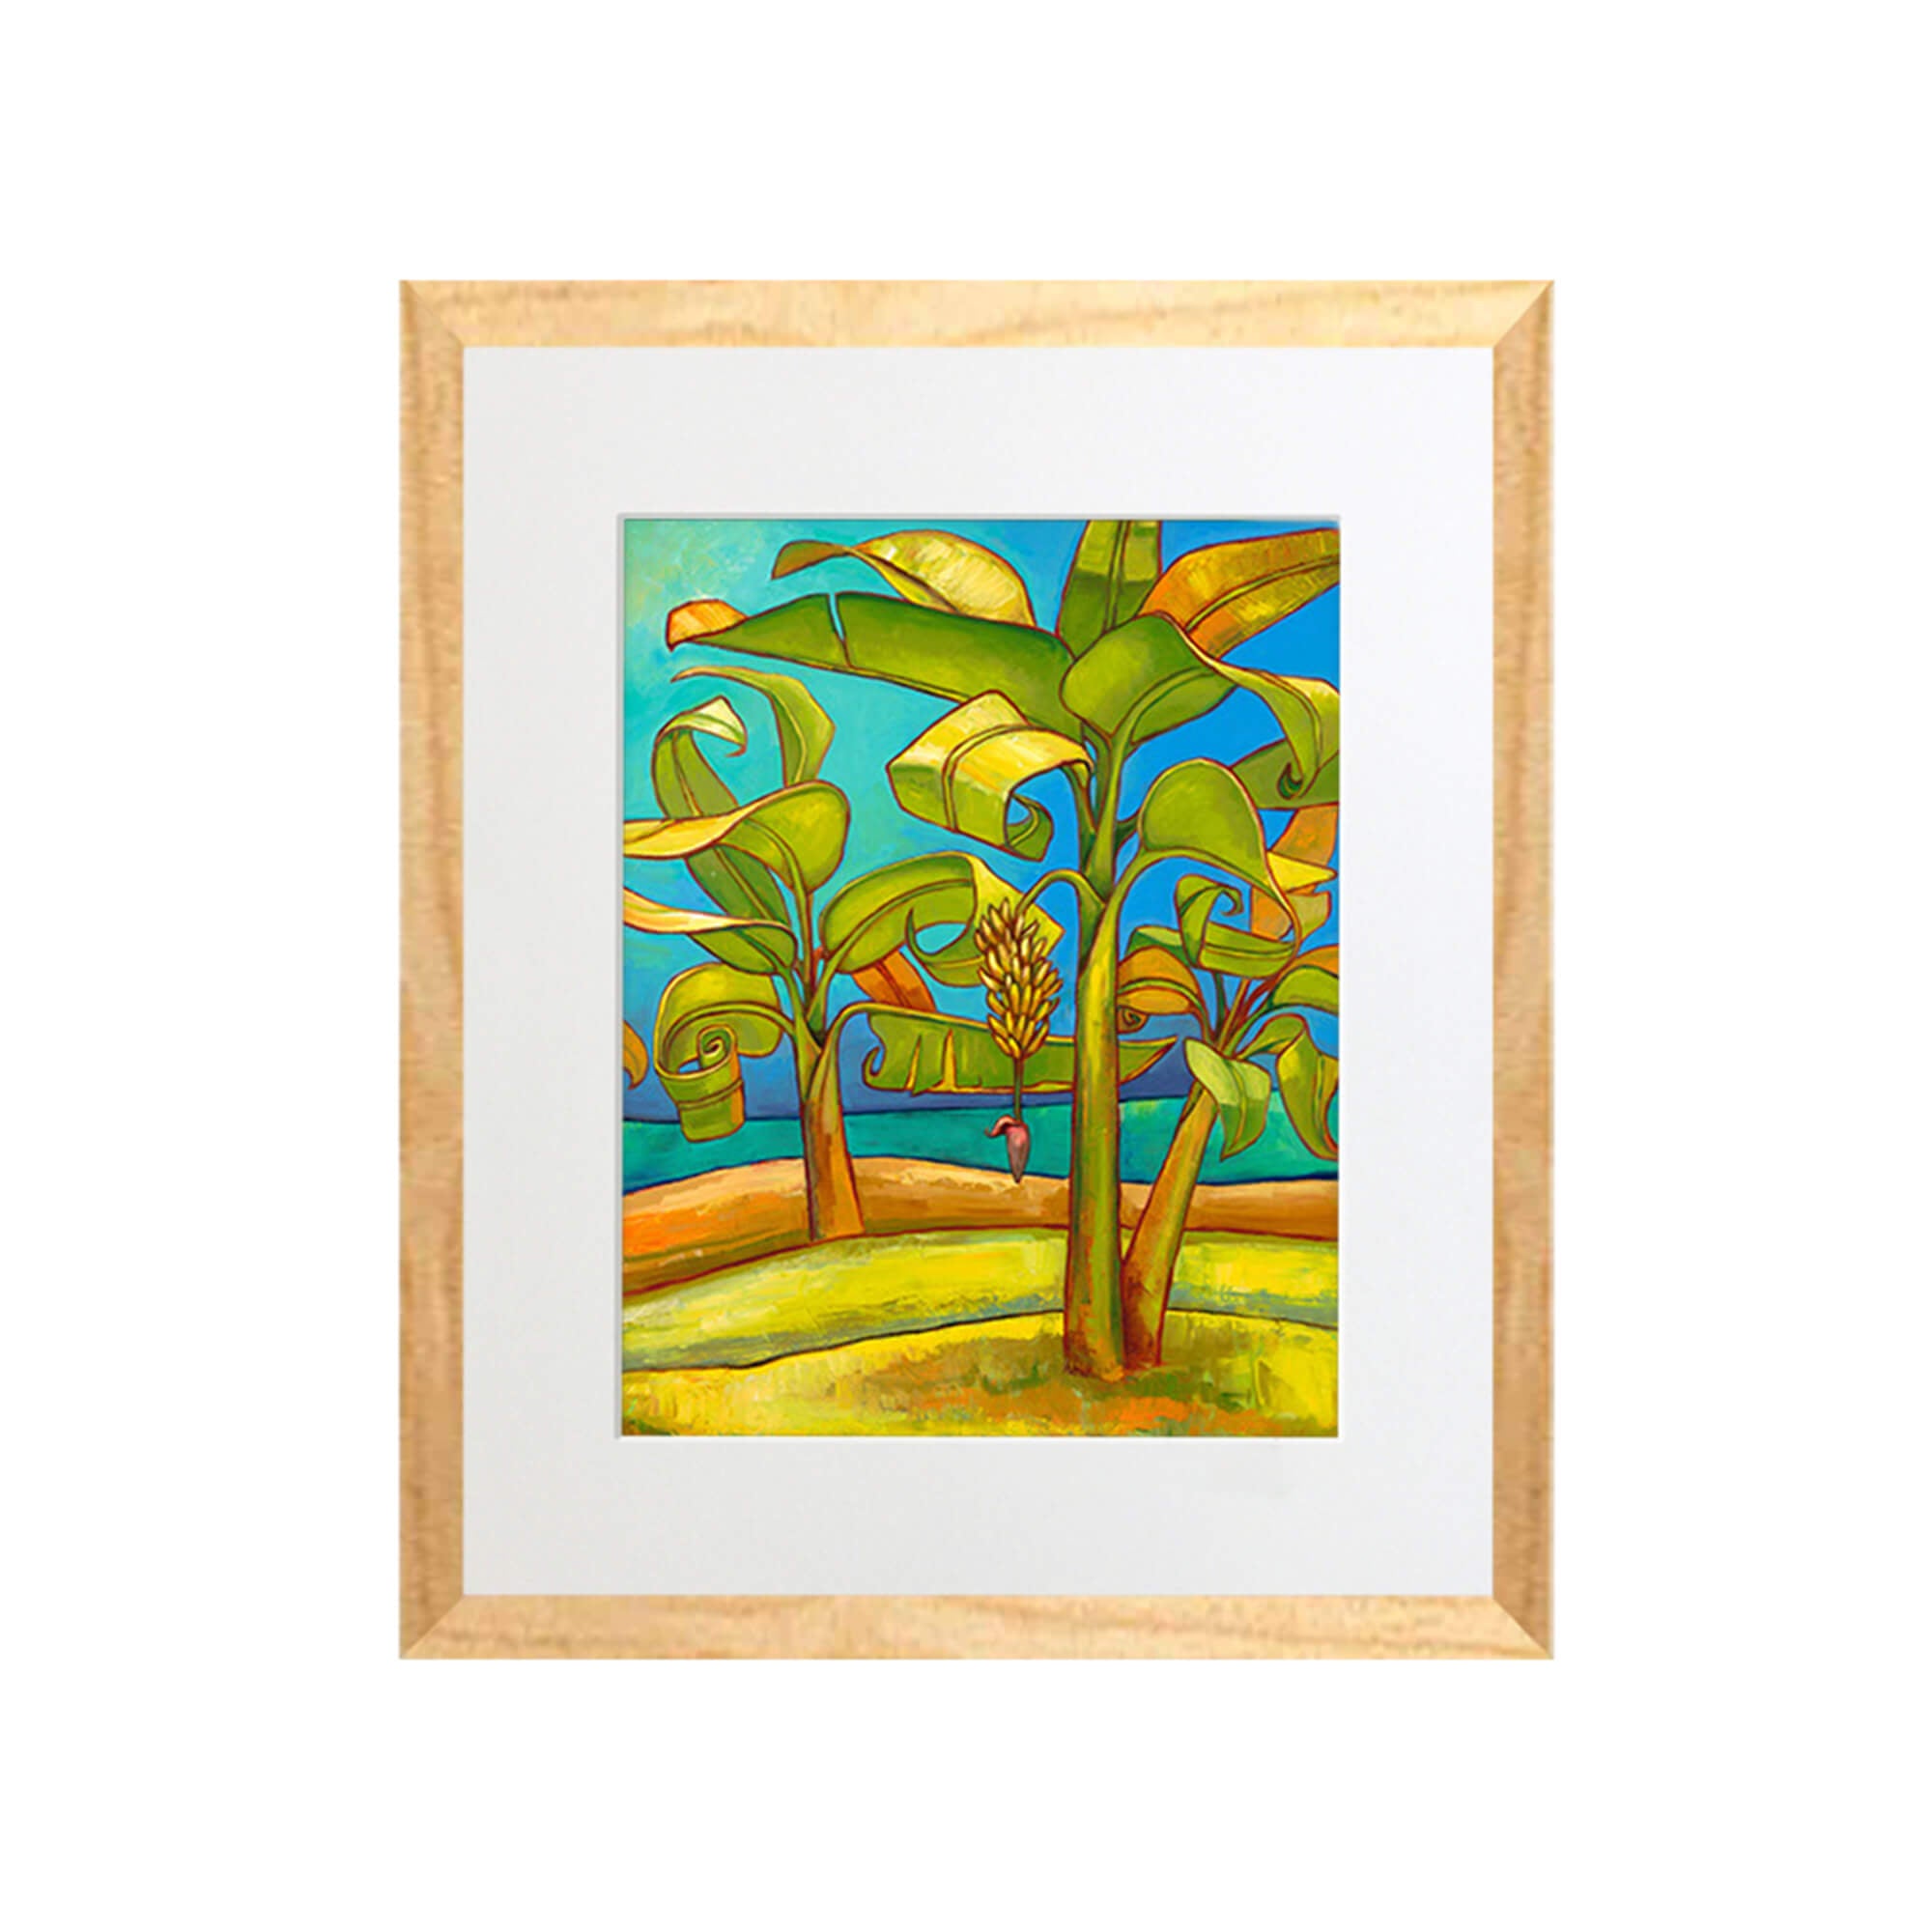 An ocean view with banana trees by Hawaii artist Colin Redican